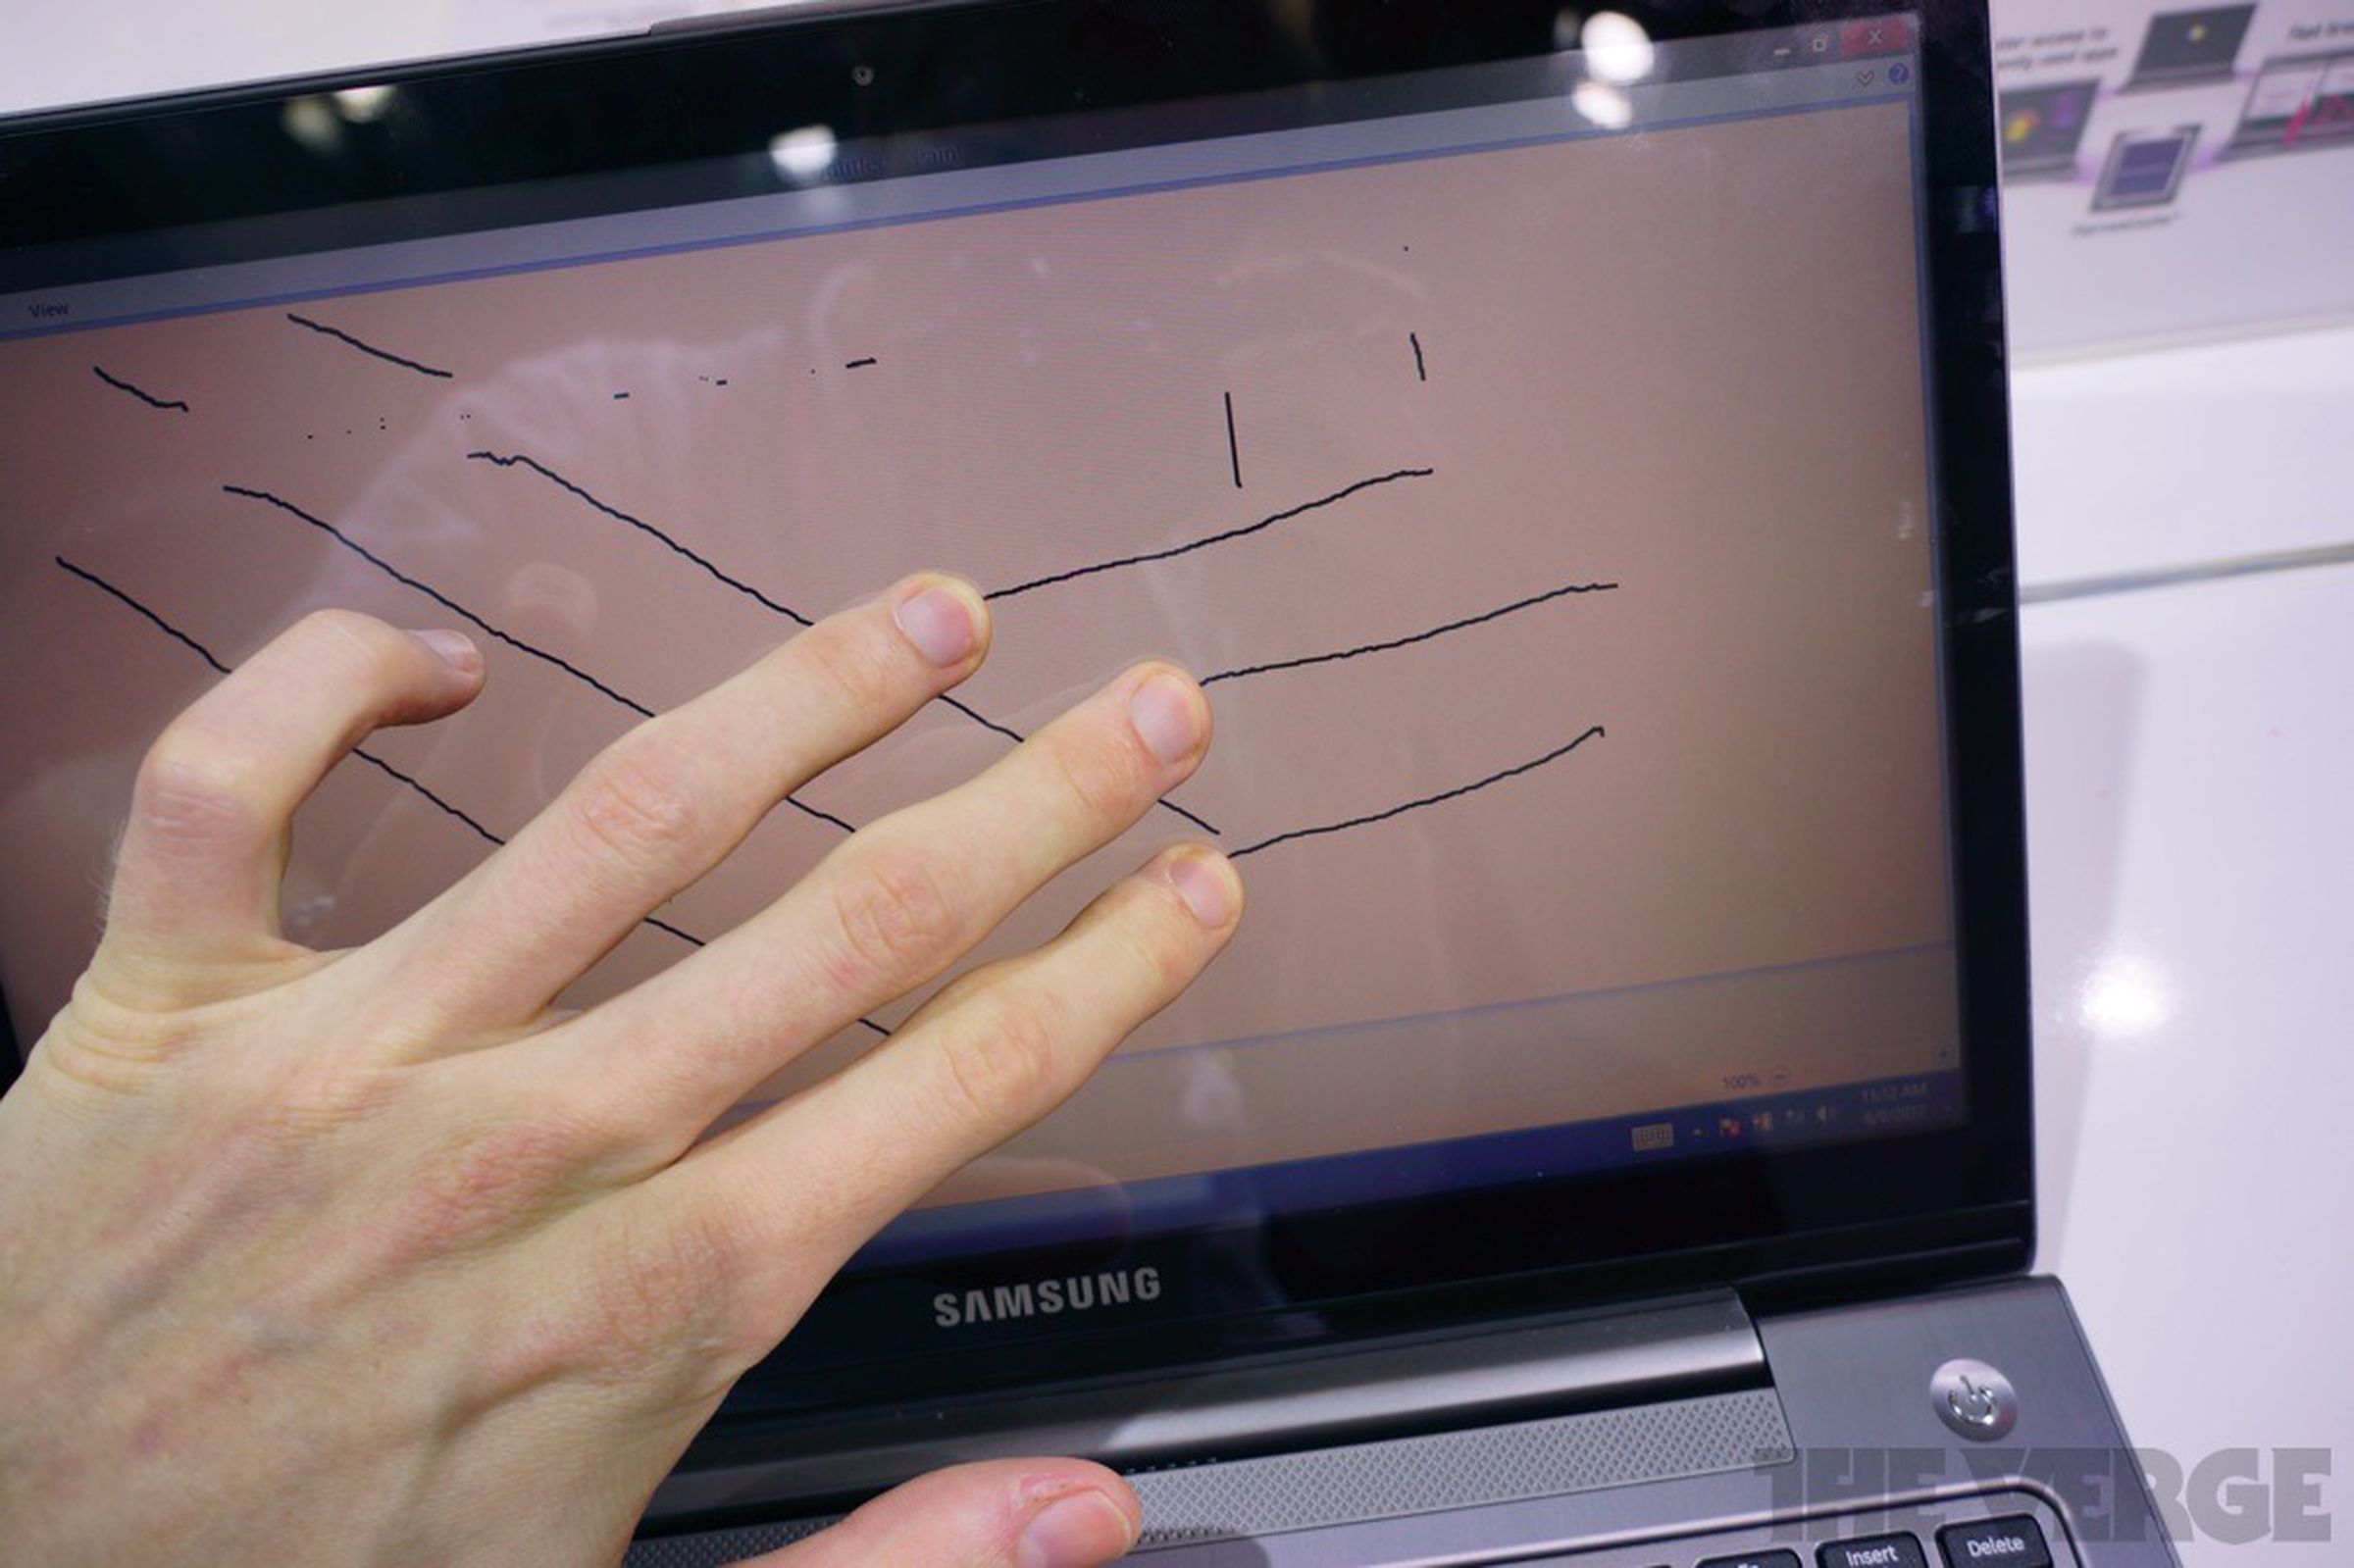 Samsung Series 5 Ultra Touch hands-on photos